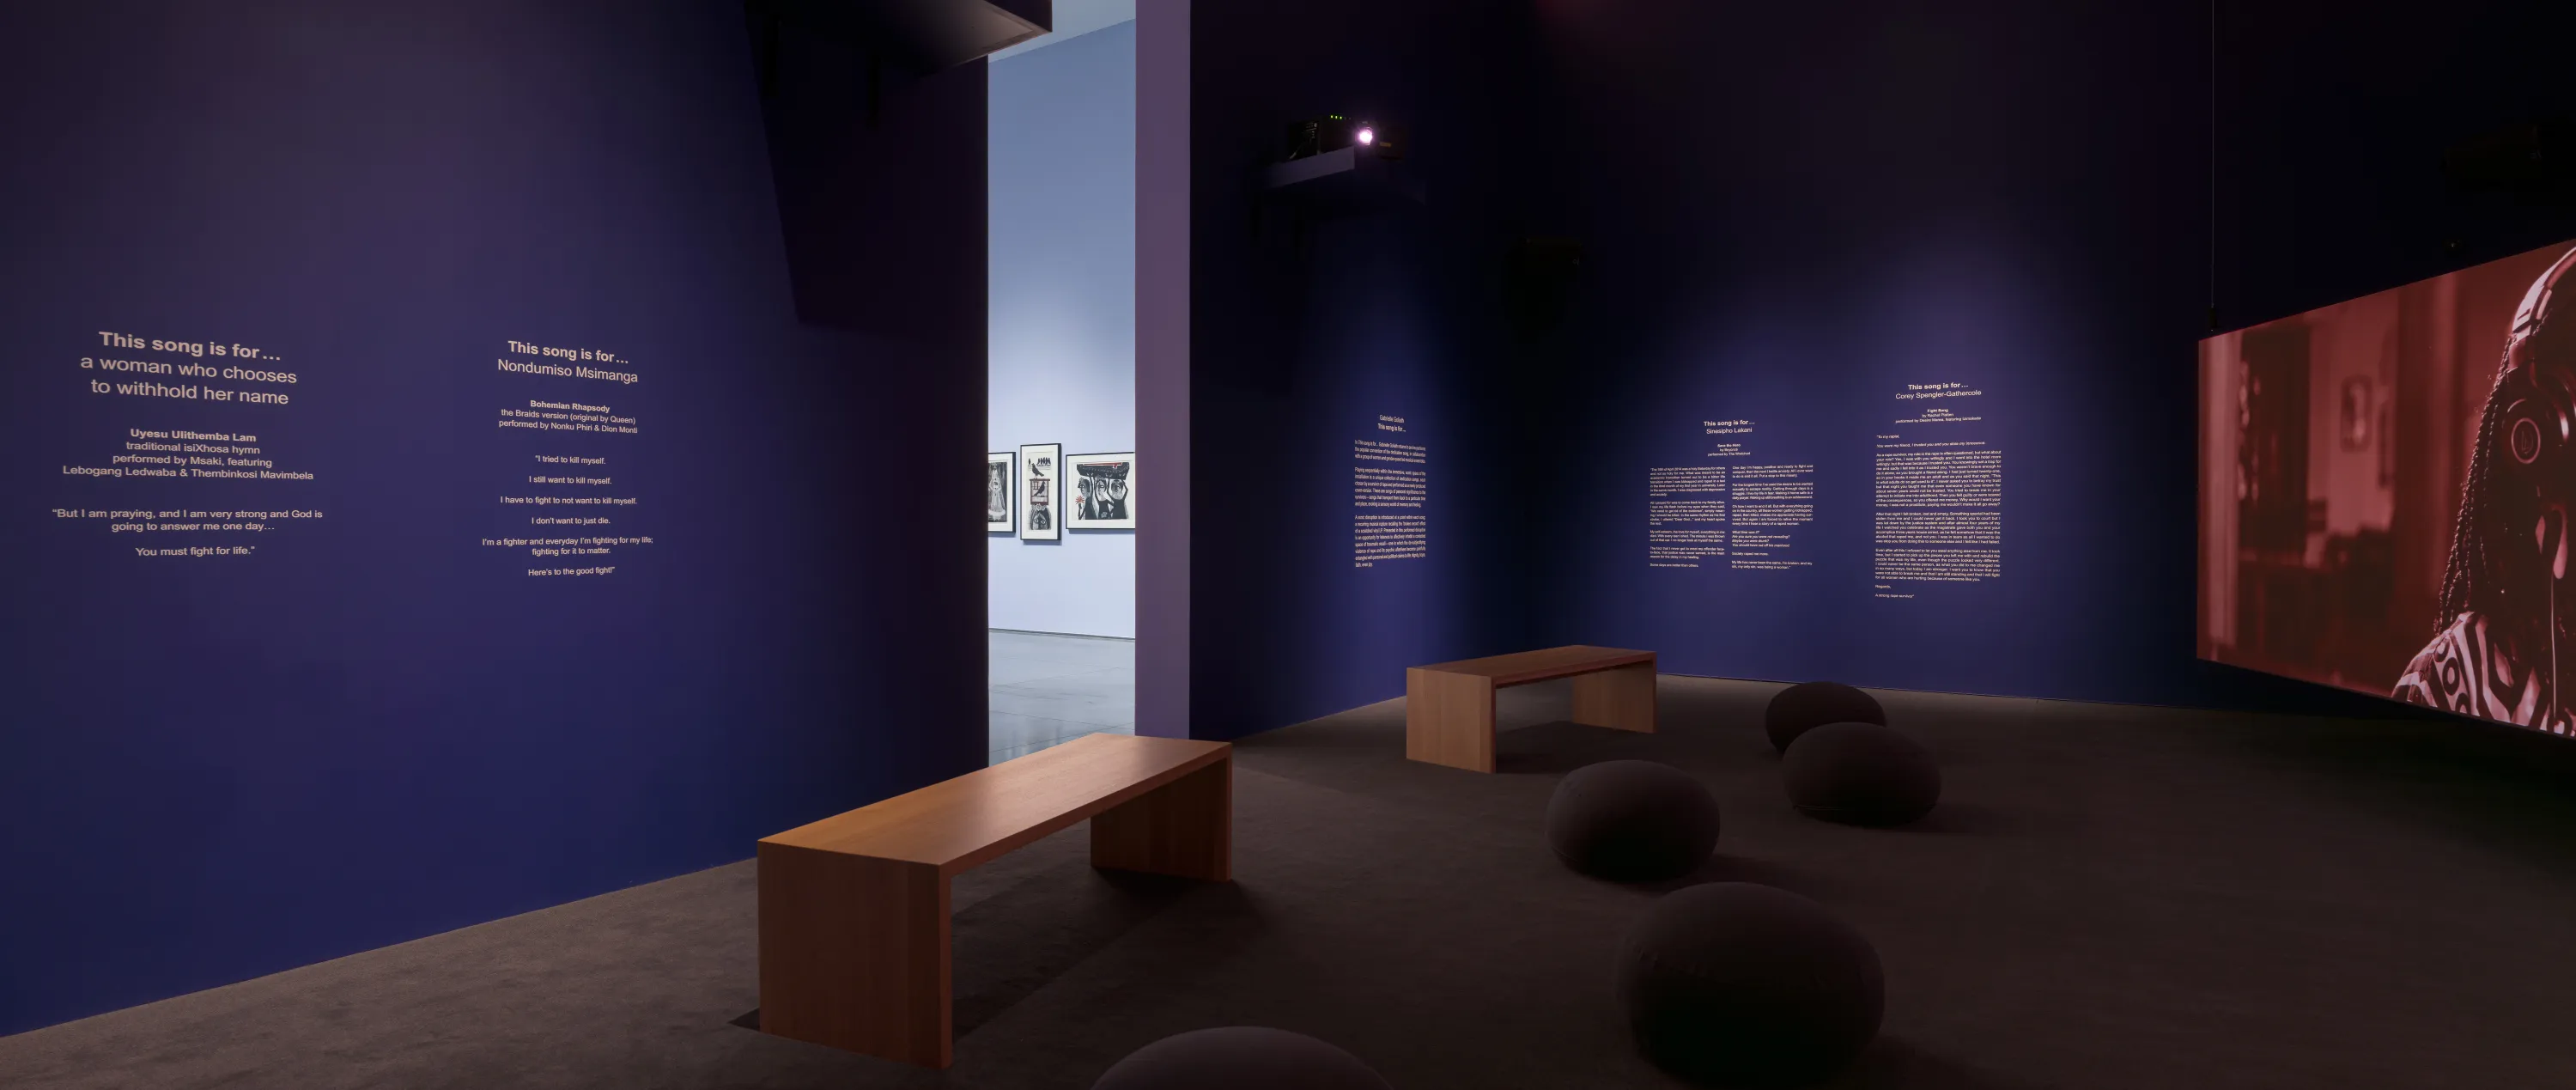 A corner of a screen in a screening room with dark purple walls and gray carpeted floor. There is a seating arrangement on the floor of two wooden benches and several cushion pods.On the walls is text relating to the artwork installation. There is a middle aisle in between the walls leading to another gallery interior with light lavender walls.